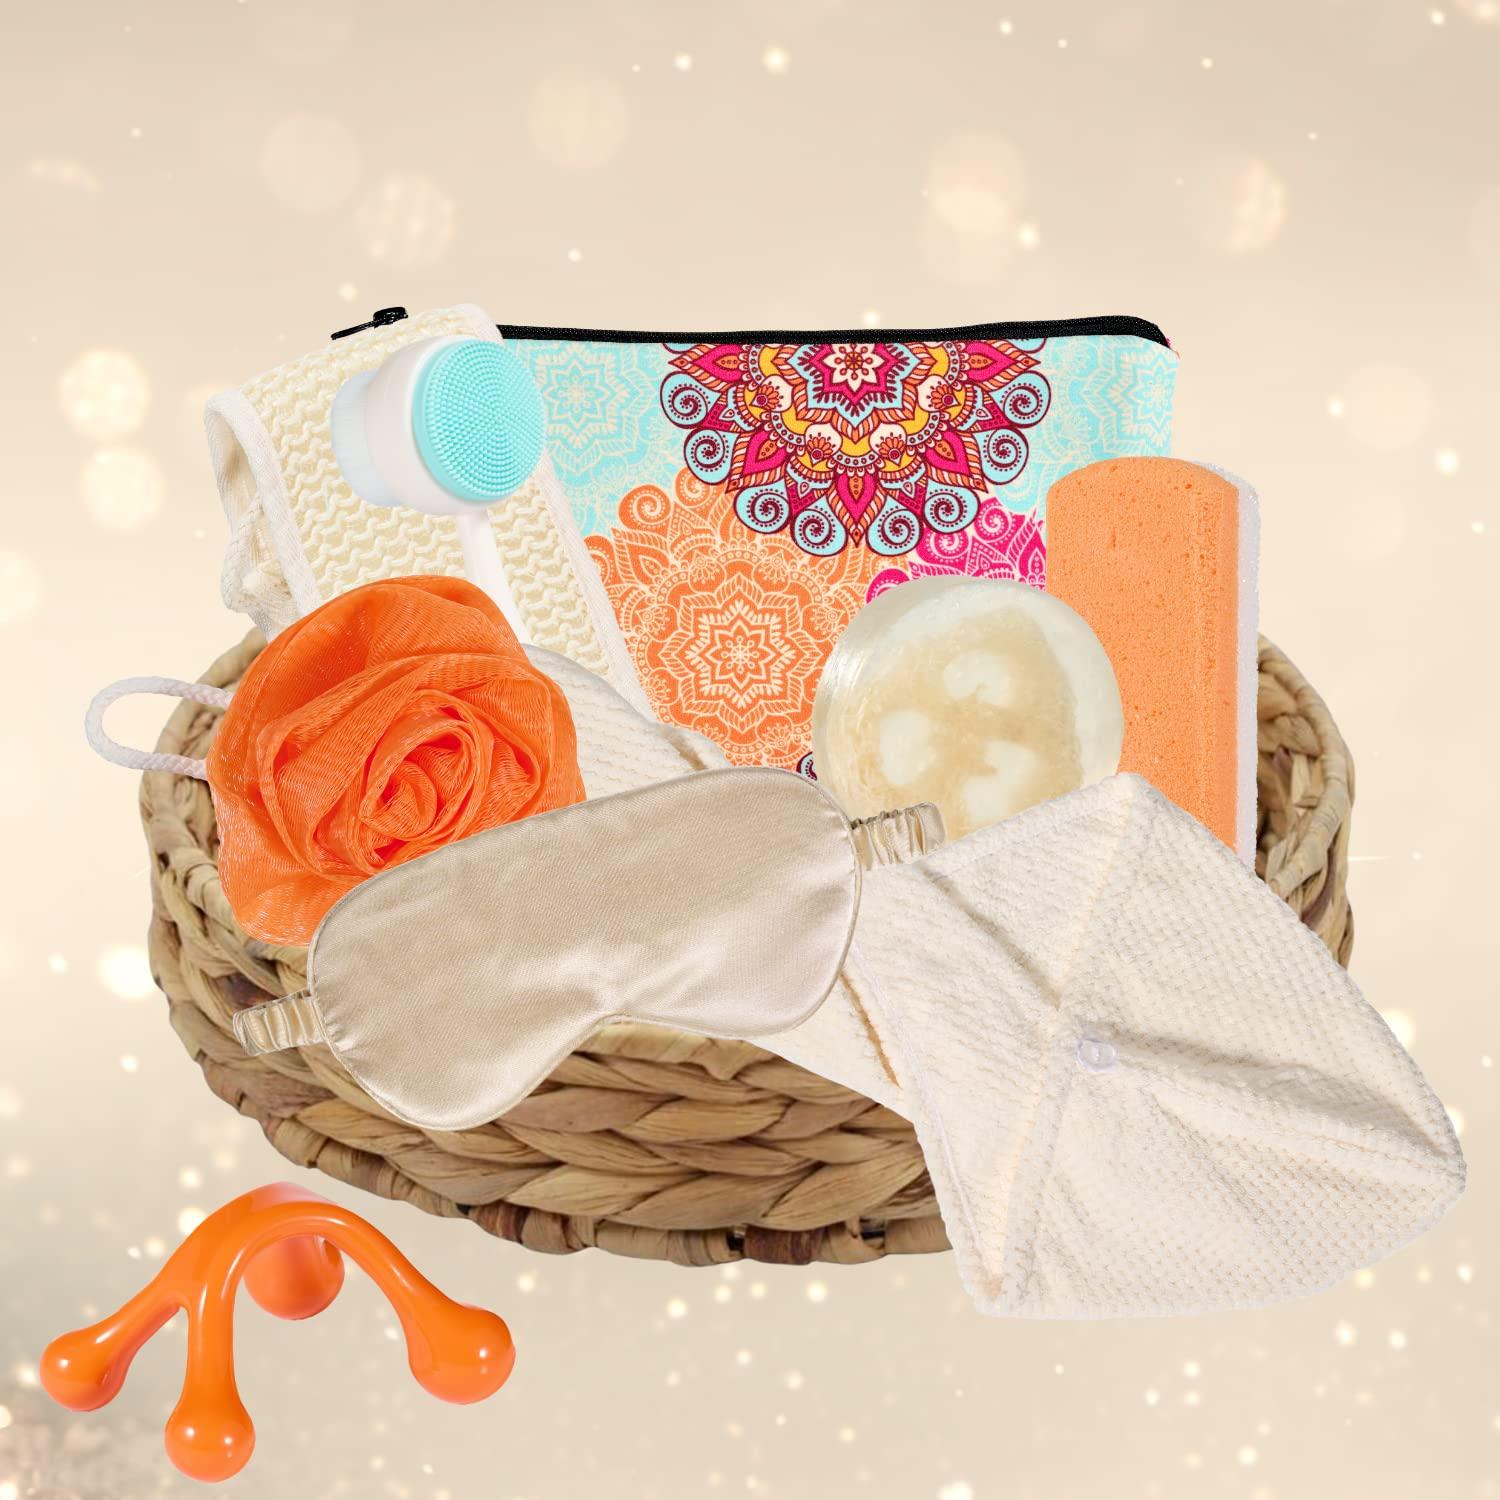  Birthday Gifts for Women - Make Her Feel Special with Relaxing  Spa Gift Baskets Set - Unique Birthday Bath Box for Mom Sister and Best  Friend - Happy Bday Basket